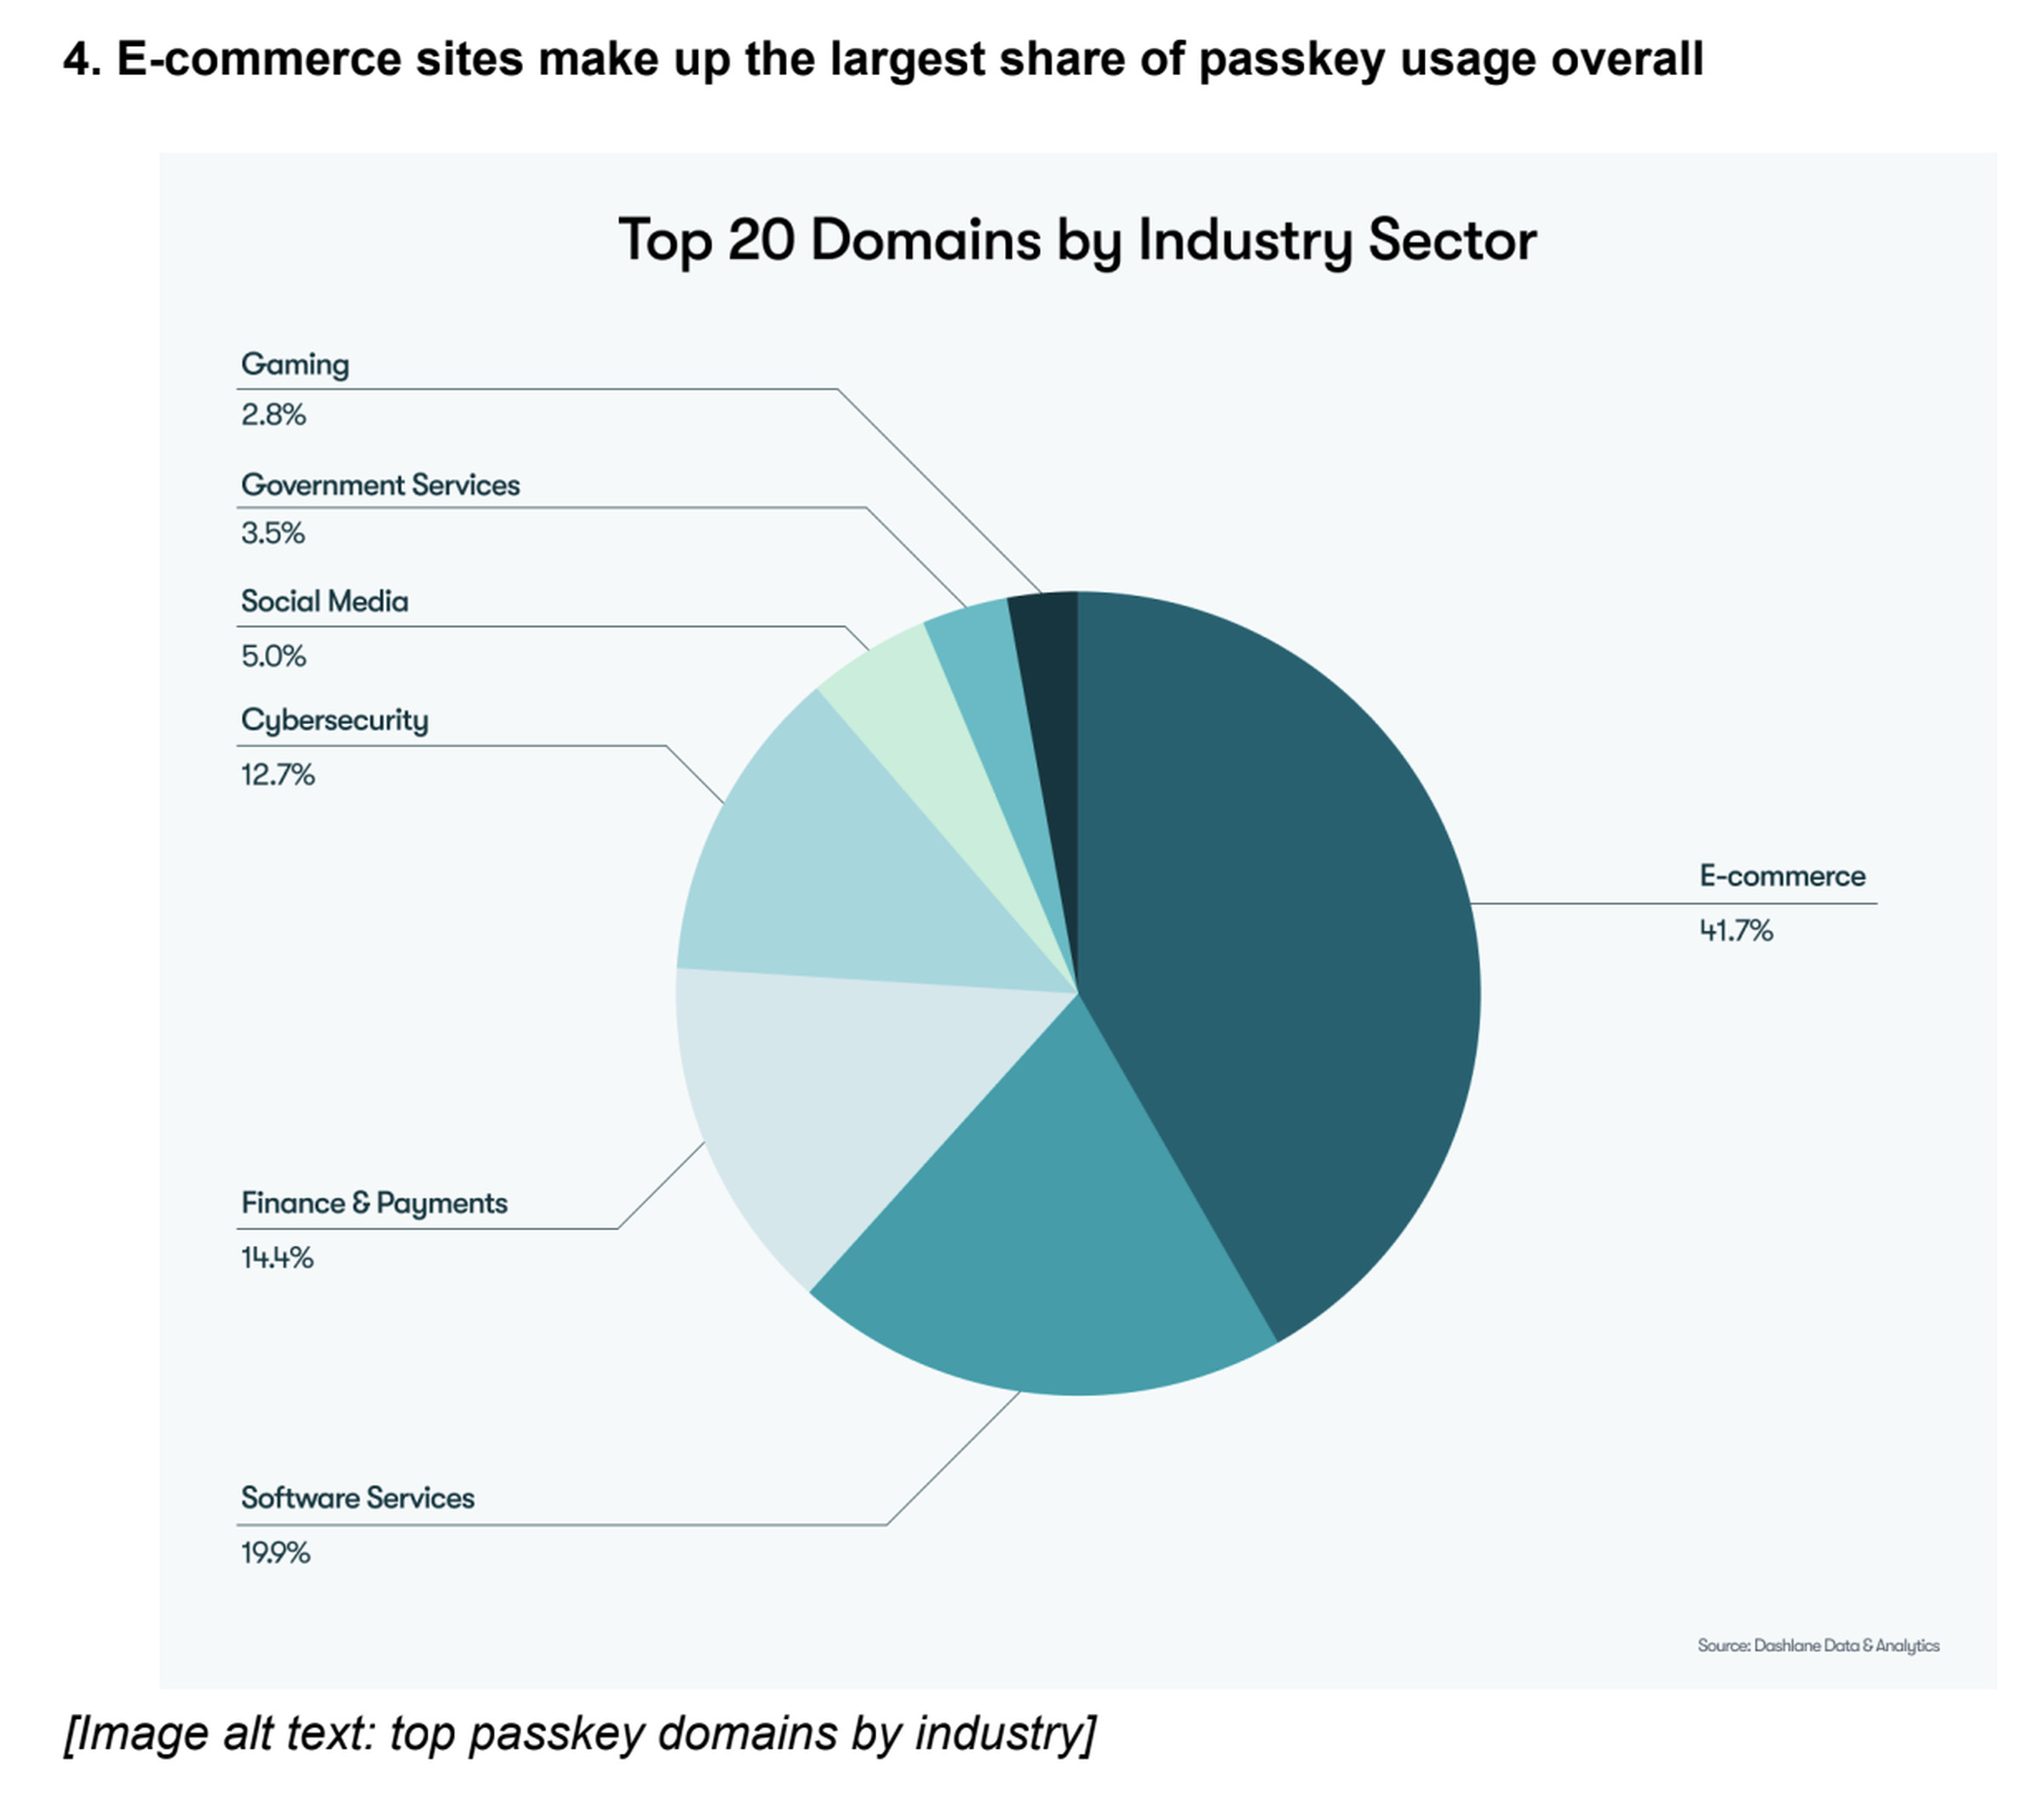 A breakdown of Dashlane’s passkey adoption by industry sector.